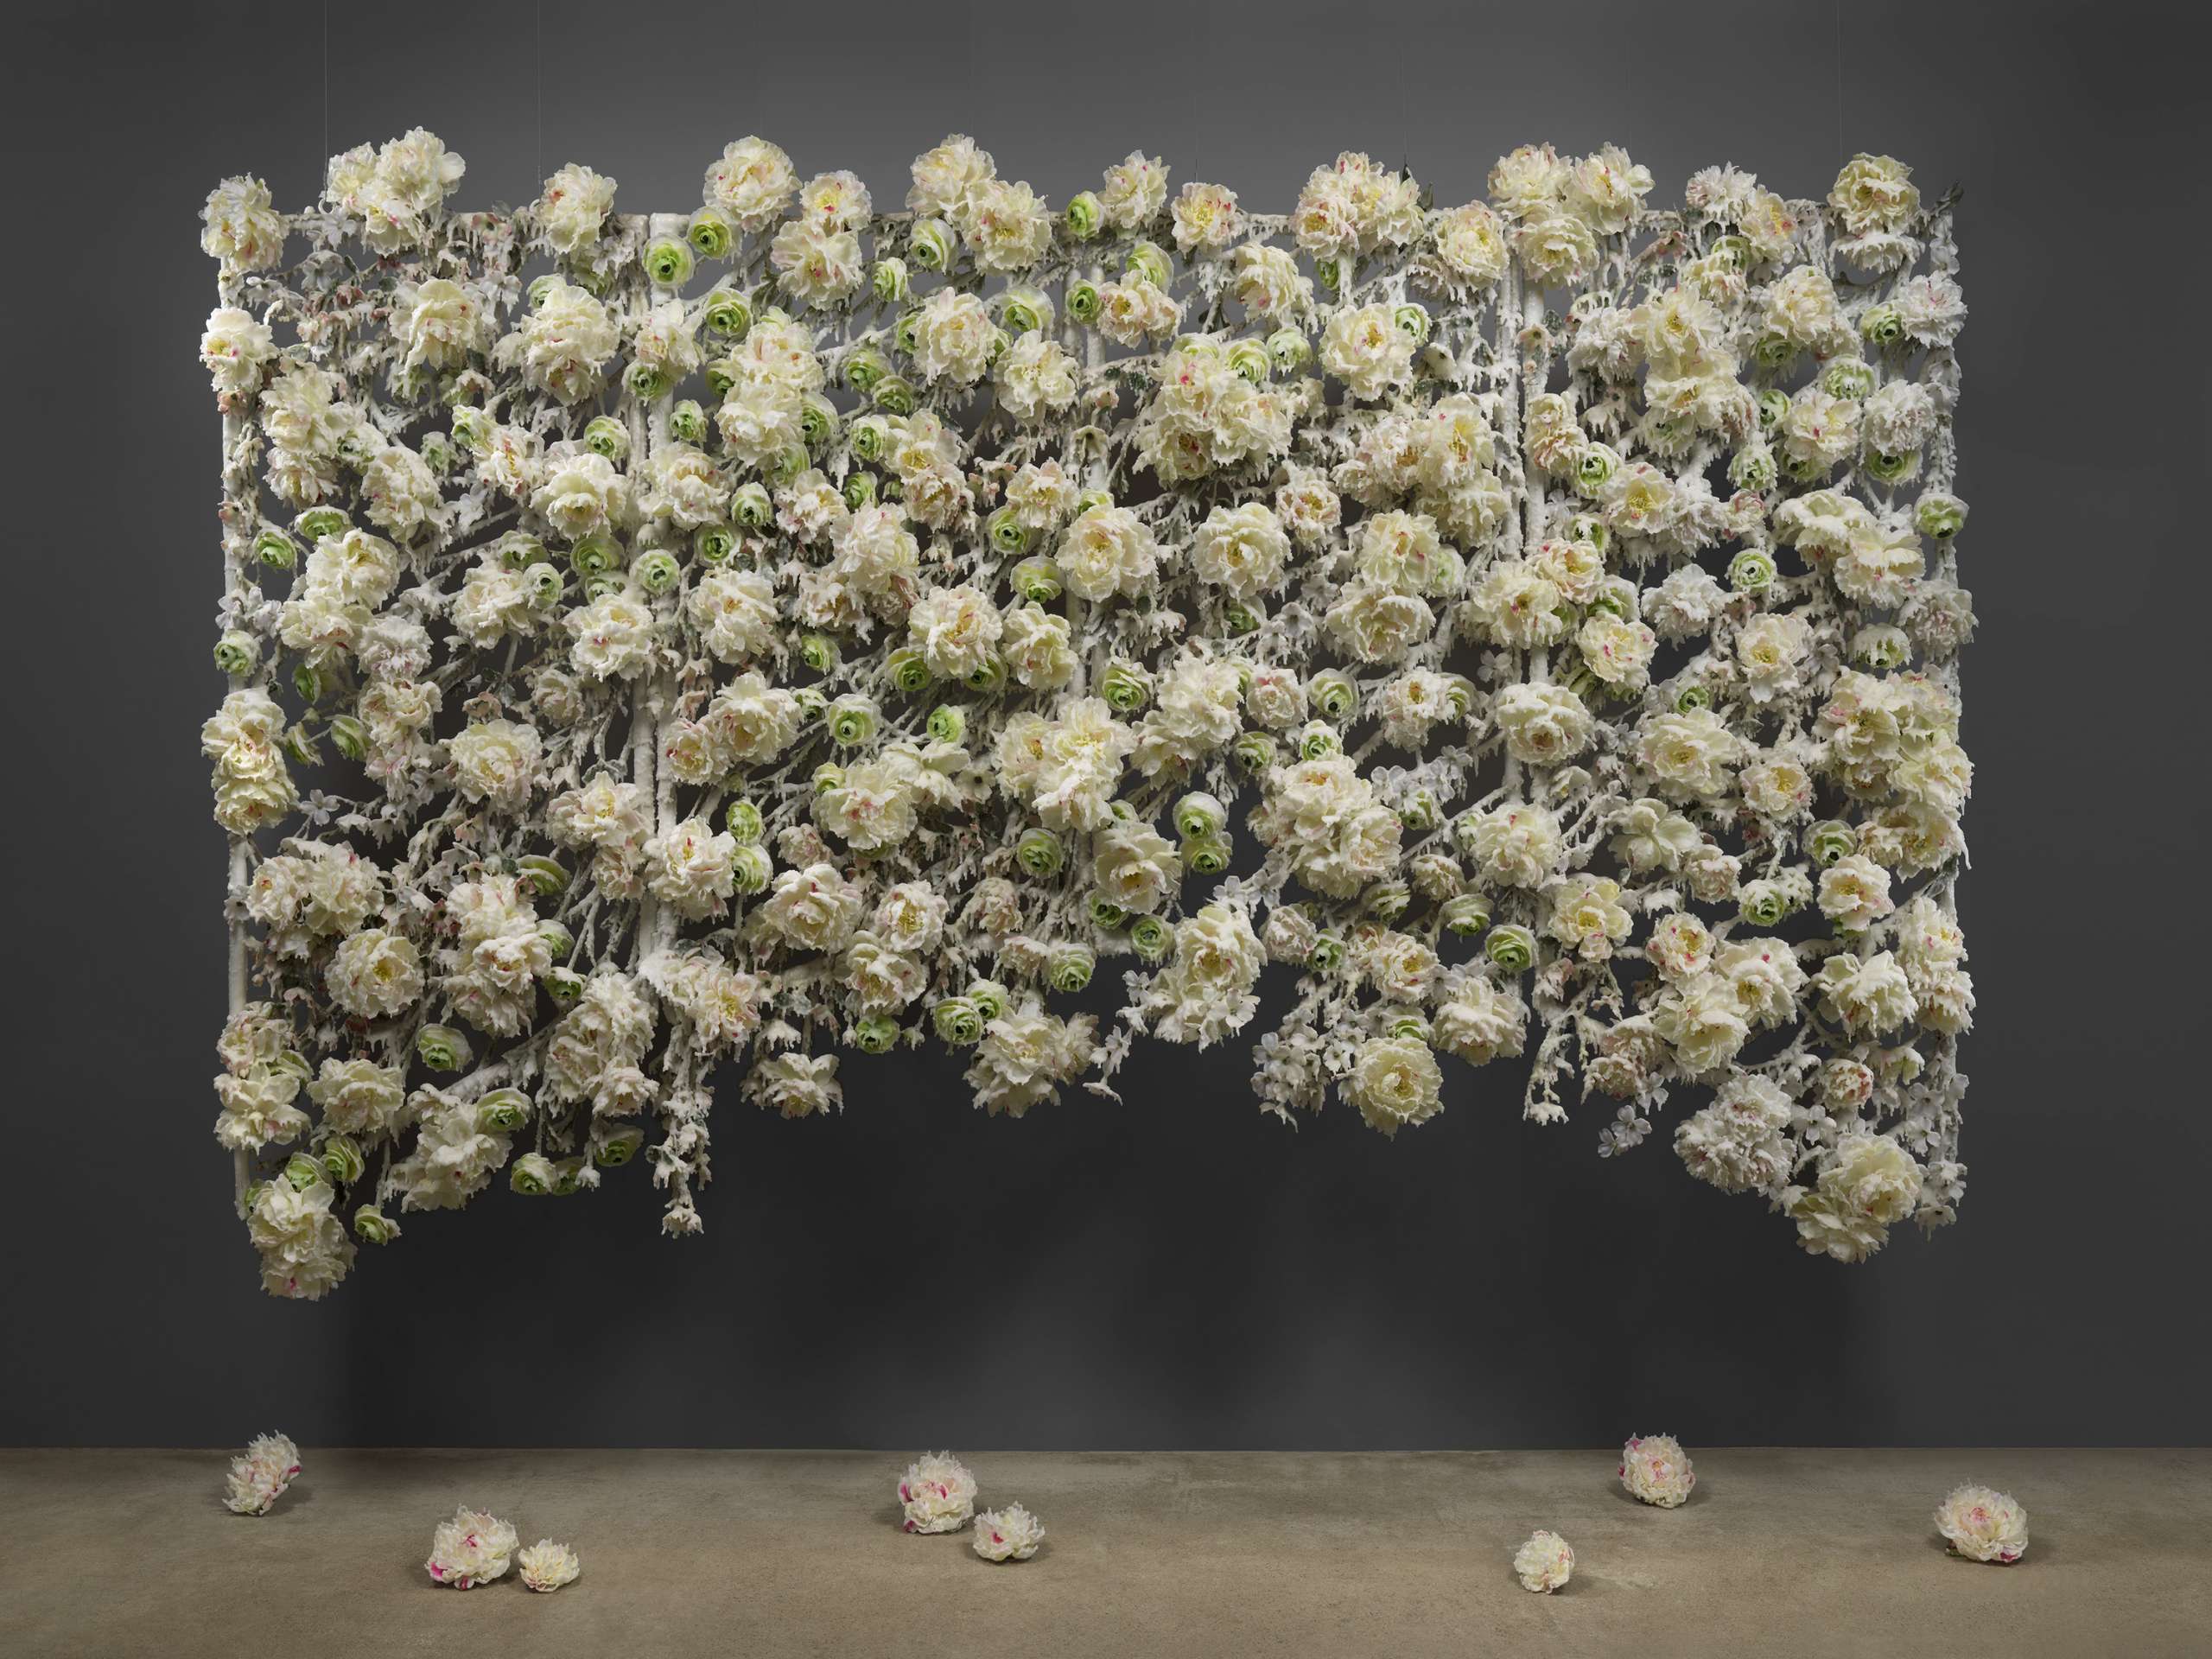 Petah Coyne, Untitled #1290 (Spring Snow), 2008-2020. Silk flowers, specially-formulated wax, pigment, fabricated steel understructure, cable, cable nuts, wire, Velcro, thread, quick-link shackles, jaw-to-jaw swivel. 200.7 x 304.8 x 35.6 cm. Courtesy of Petah Coyne Studio and Nunu Fine Art. Photo by Christopher Burke Studio.